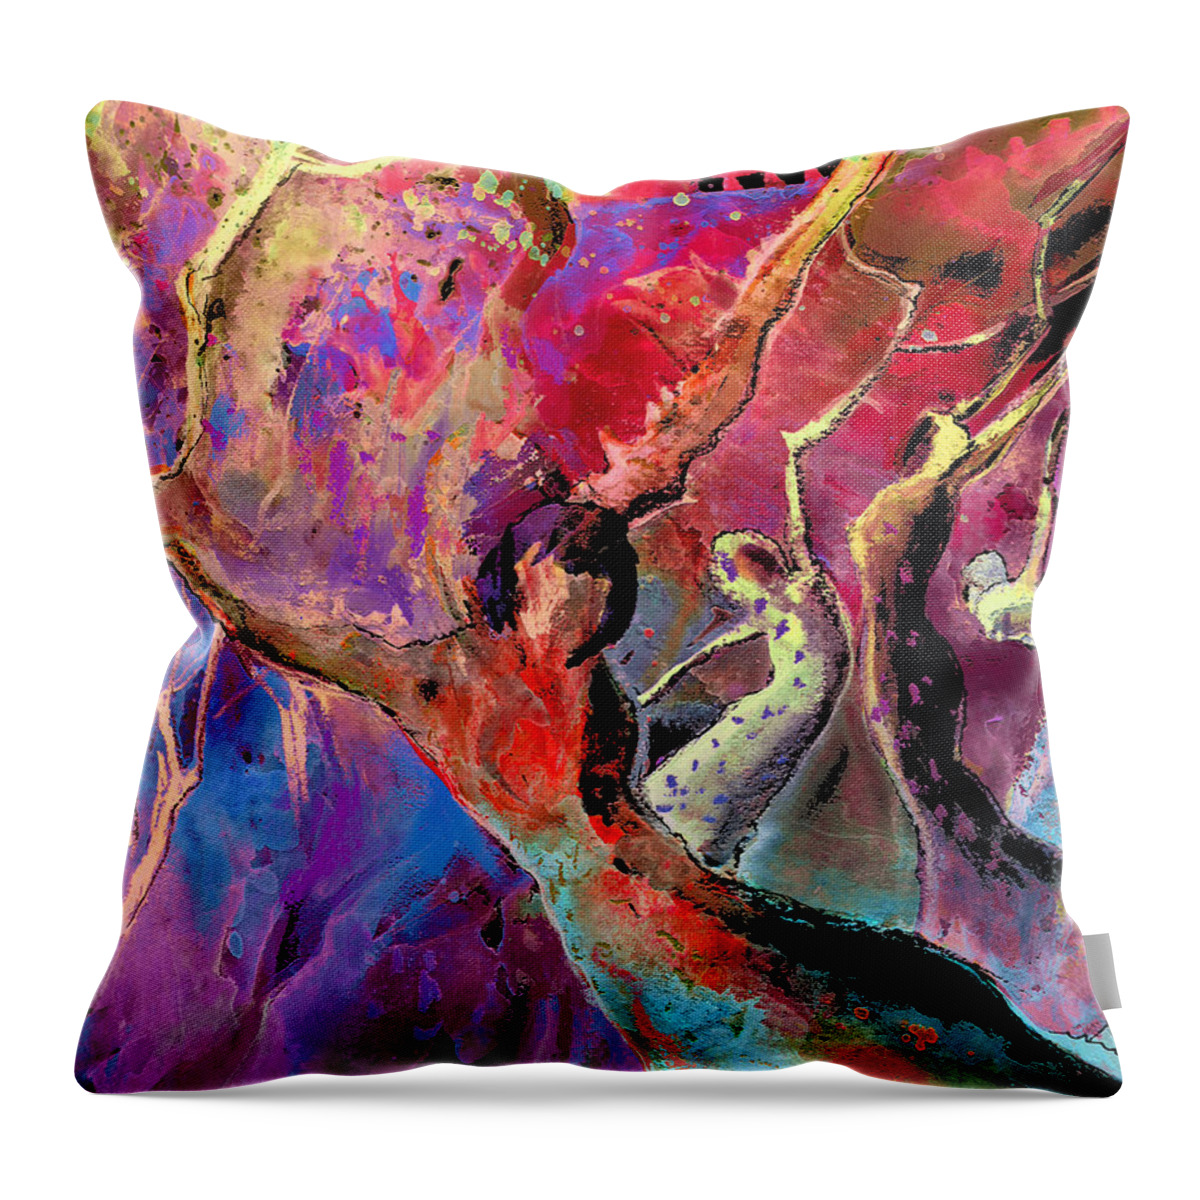 Fantascape Throw Pillow featuring the painting I Am Woman by Miki De Goodaboom